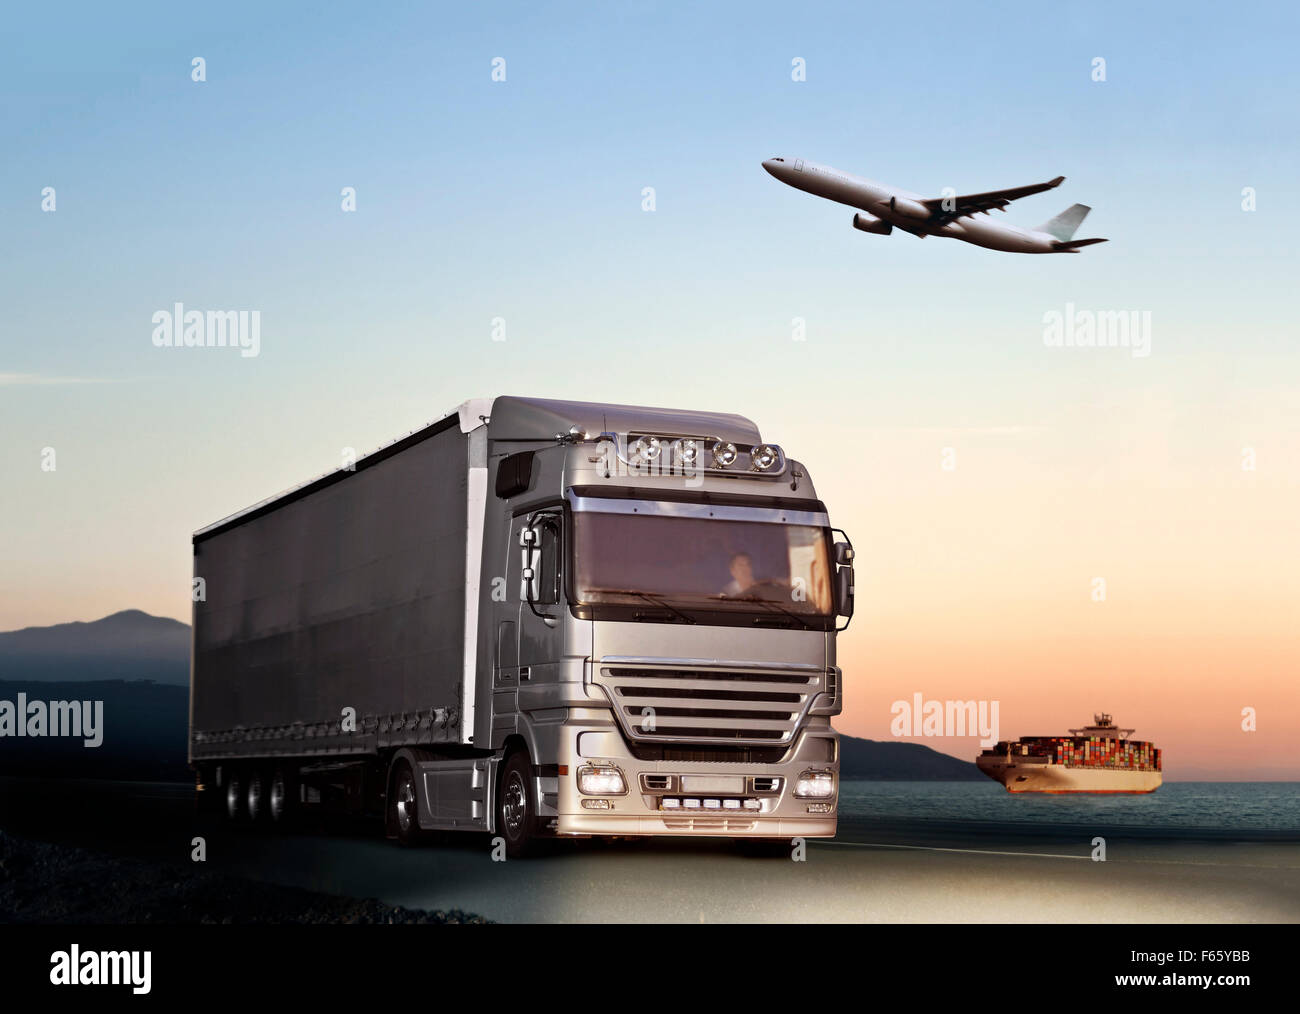 Transport by truck, ship and aircraft Digital Composite (DC) Stock Photo